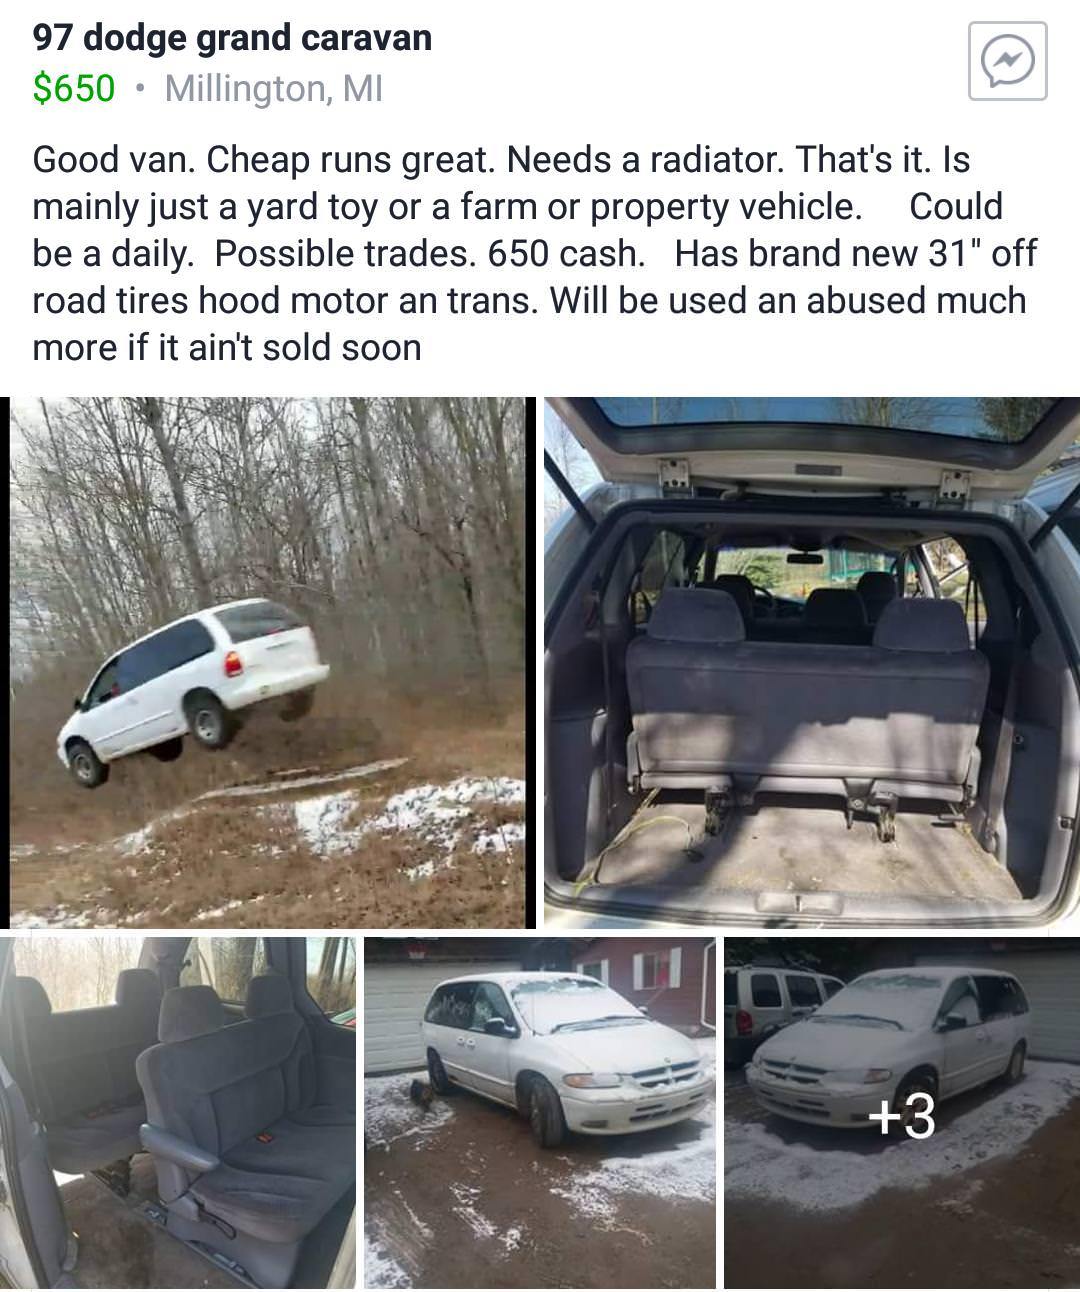 bumper - 97 dodge grand caravan $650 Millington, Mi Good van. Cheap runs great. Needs a radiator. That's it. Is mainly just a yard toy or a farm or property vehicle. Could be a daily. Possible trades. 650 cash. Has brand new 31" off road tires hood motor 